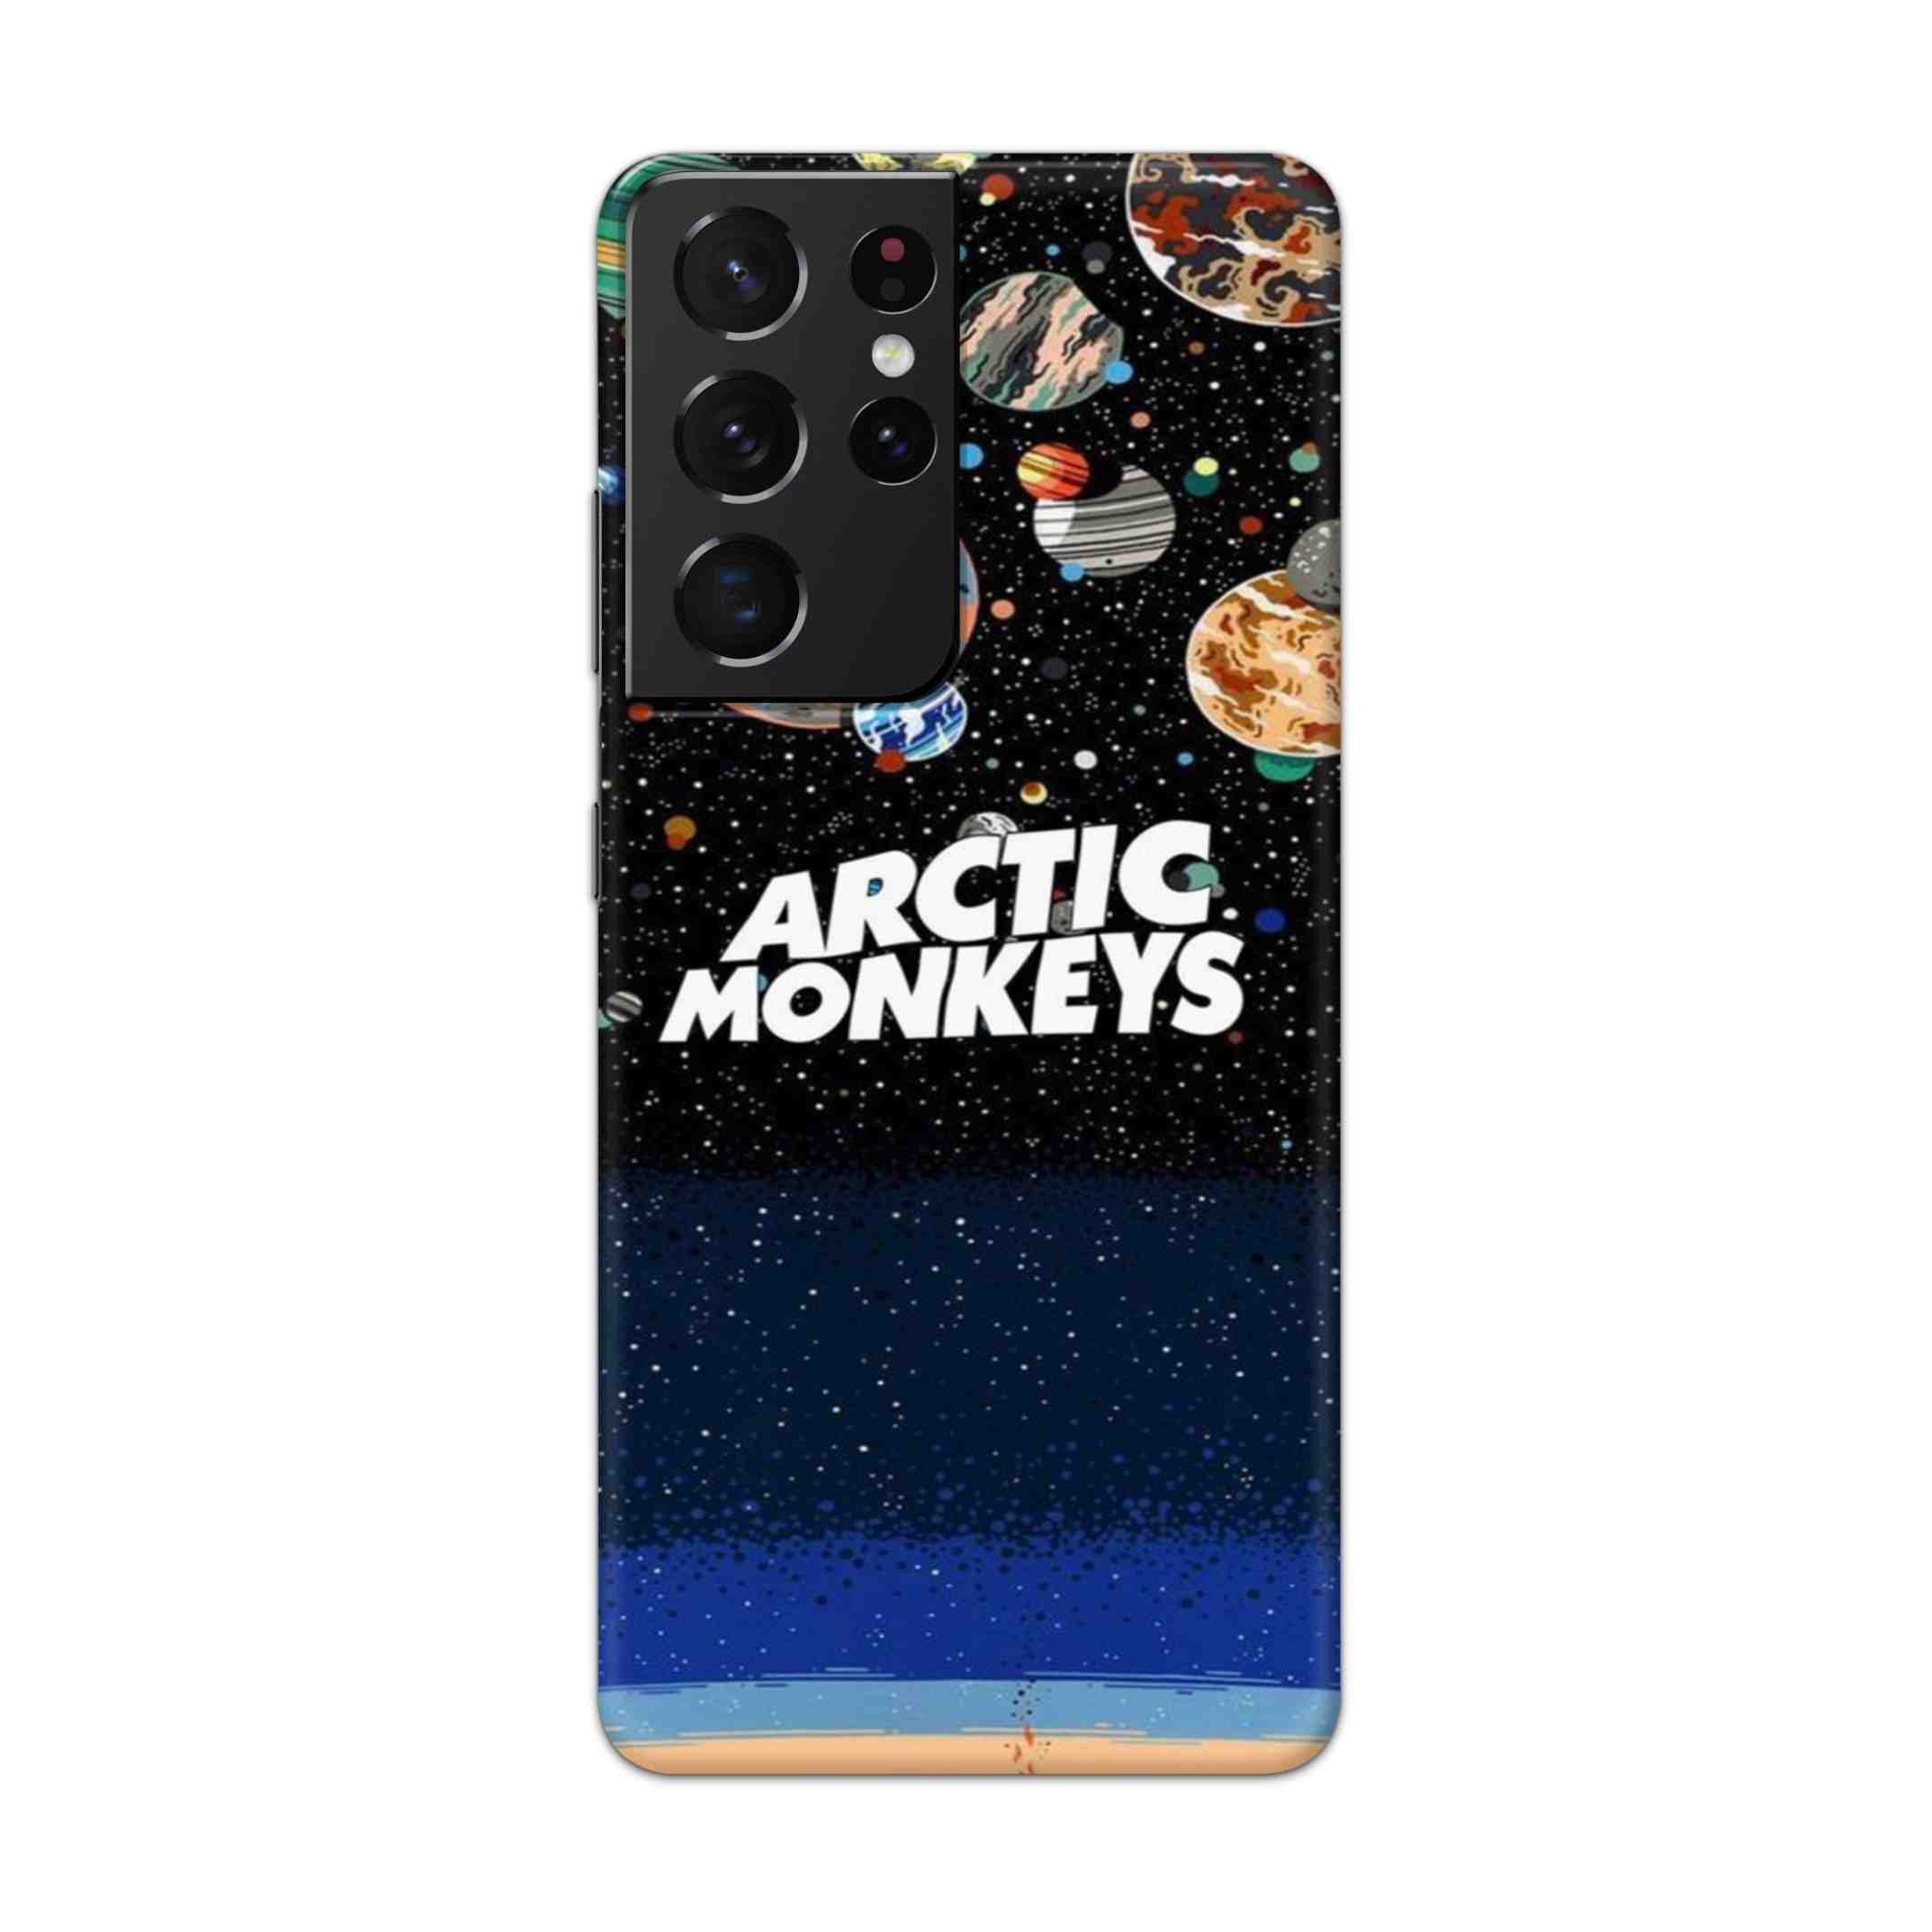 Buy Artic Monkeys Hard Back Mobile Phone Case Cover For Samsung Galaxy S21 Ultra Online